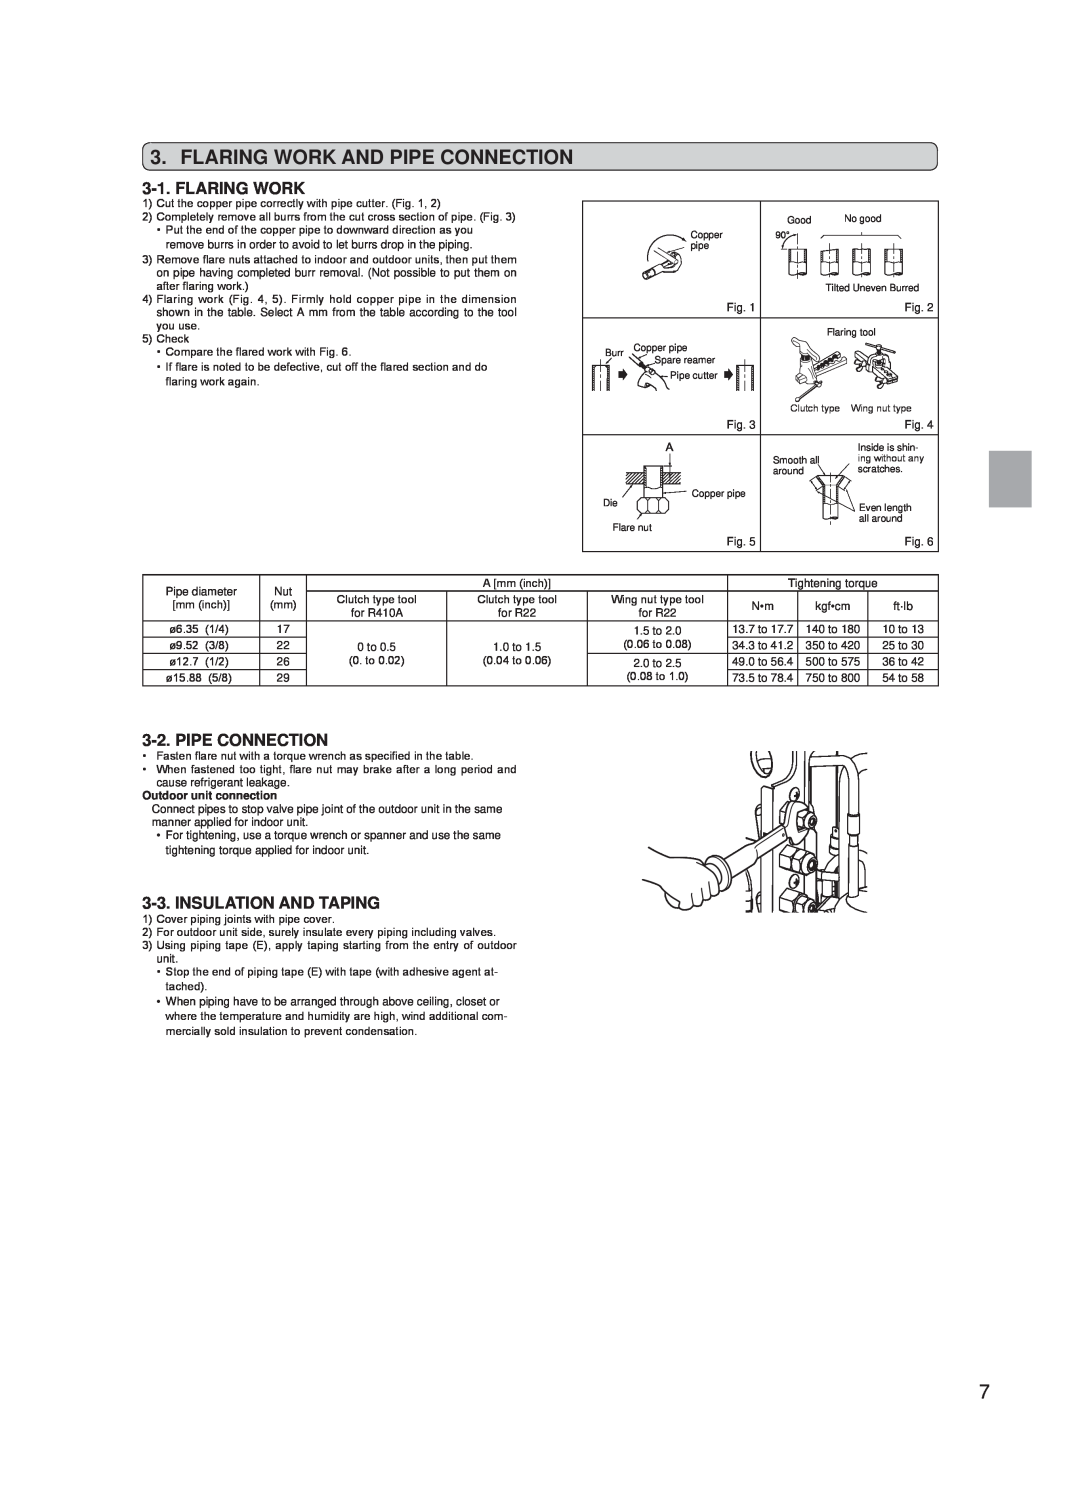 Troy-Bilt MXZ-4A36NA, MXZ-3A30NA installation manual Flaring Work And Pipe Connection, Insulation And Taping 